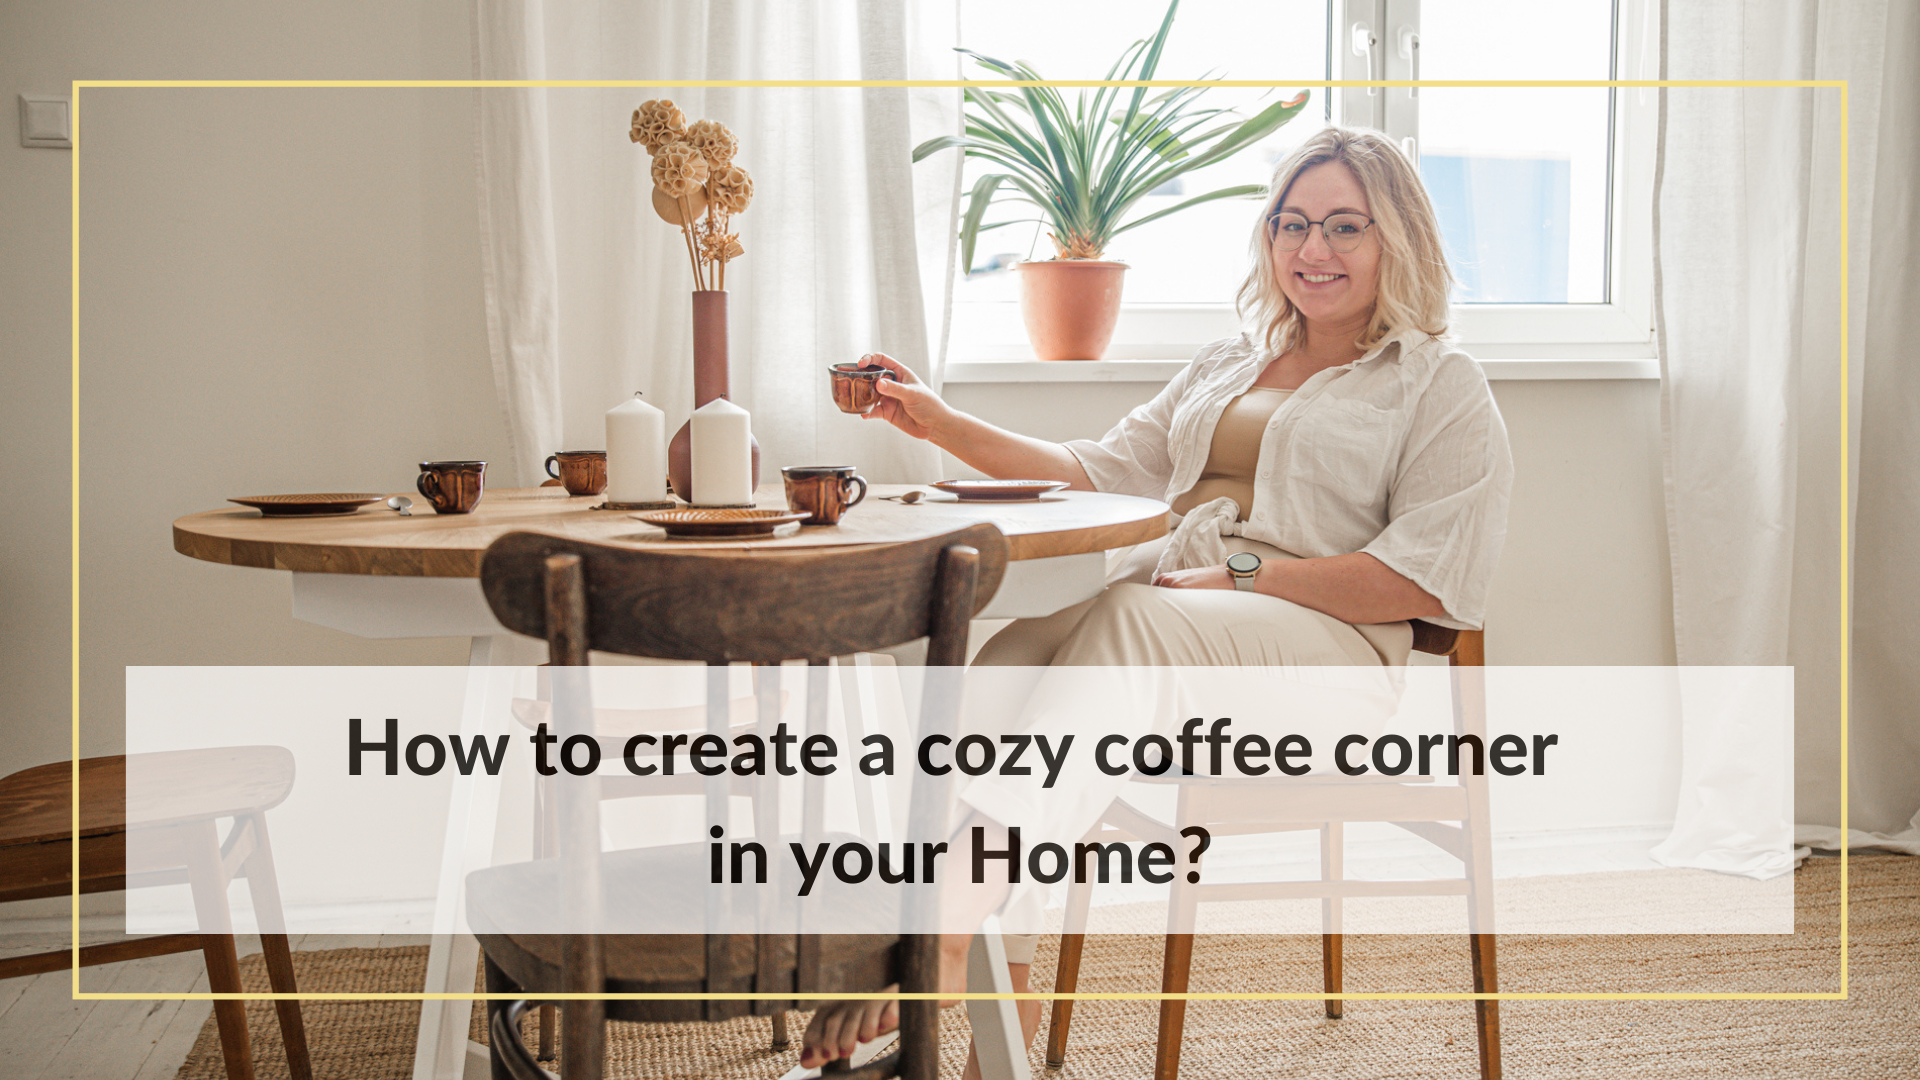 How to create a cozy coffee corner in your Home?